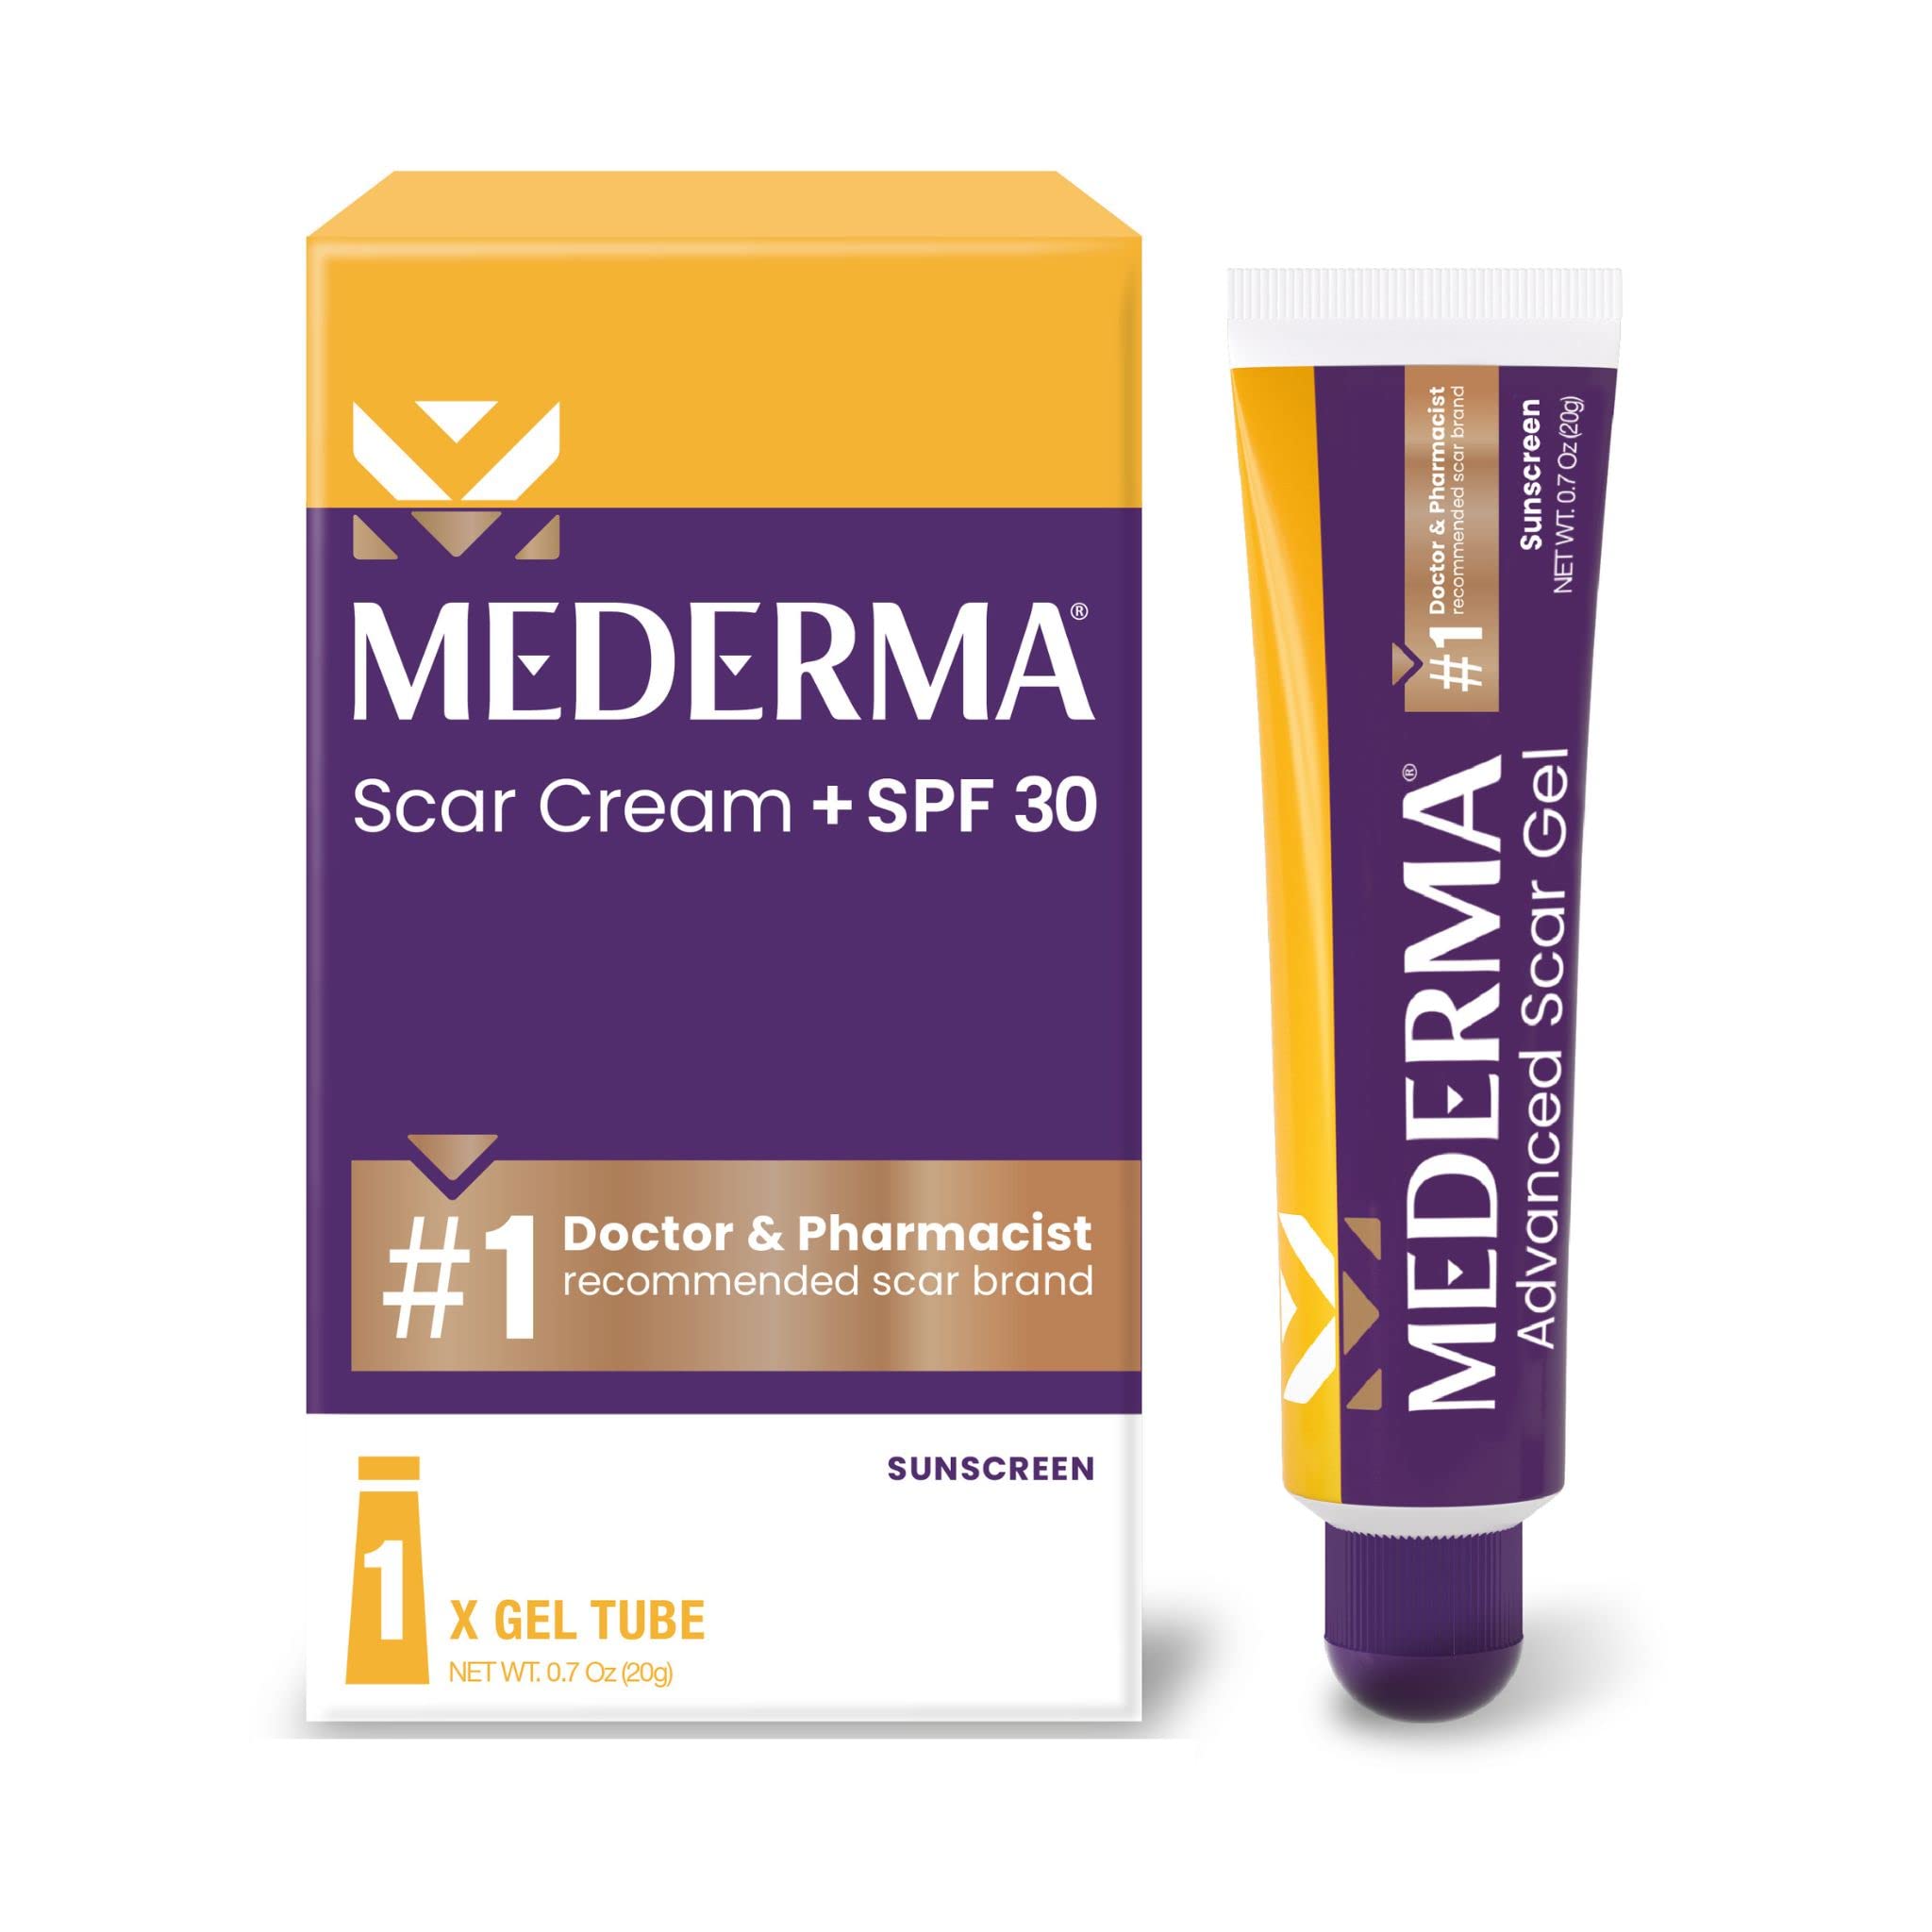 Mederma Scar Cream Plus SPF 30, Sunscreen, Protects from Sun Damage, Reduces the Appearance of Scars, 0.7 Ounce, 20 grams (Packaging May Vary) $9